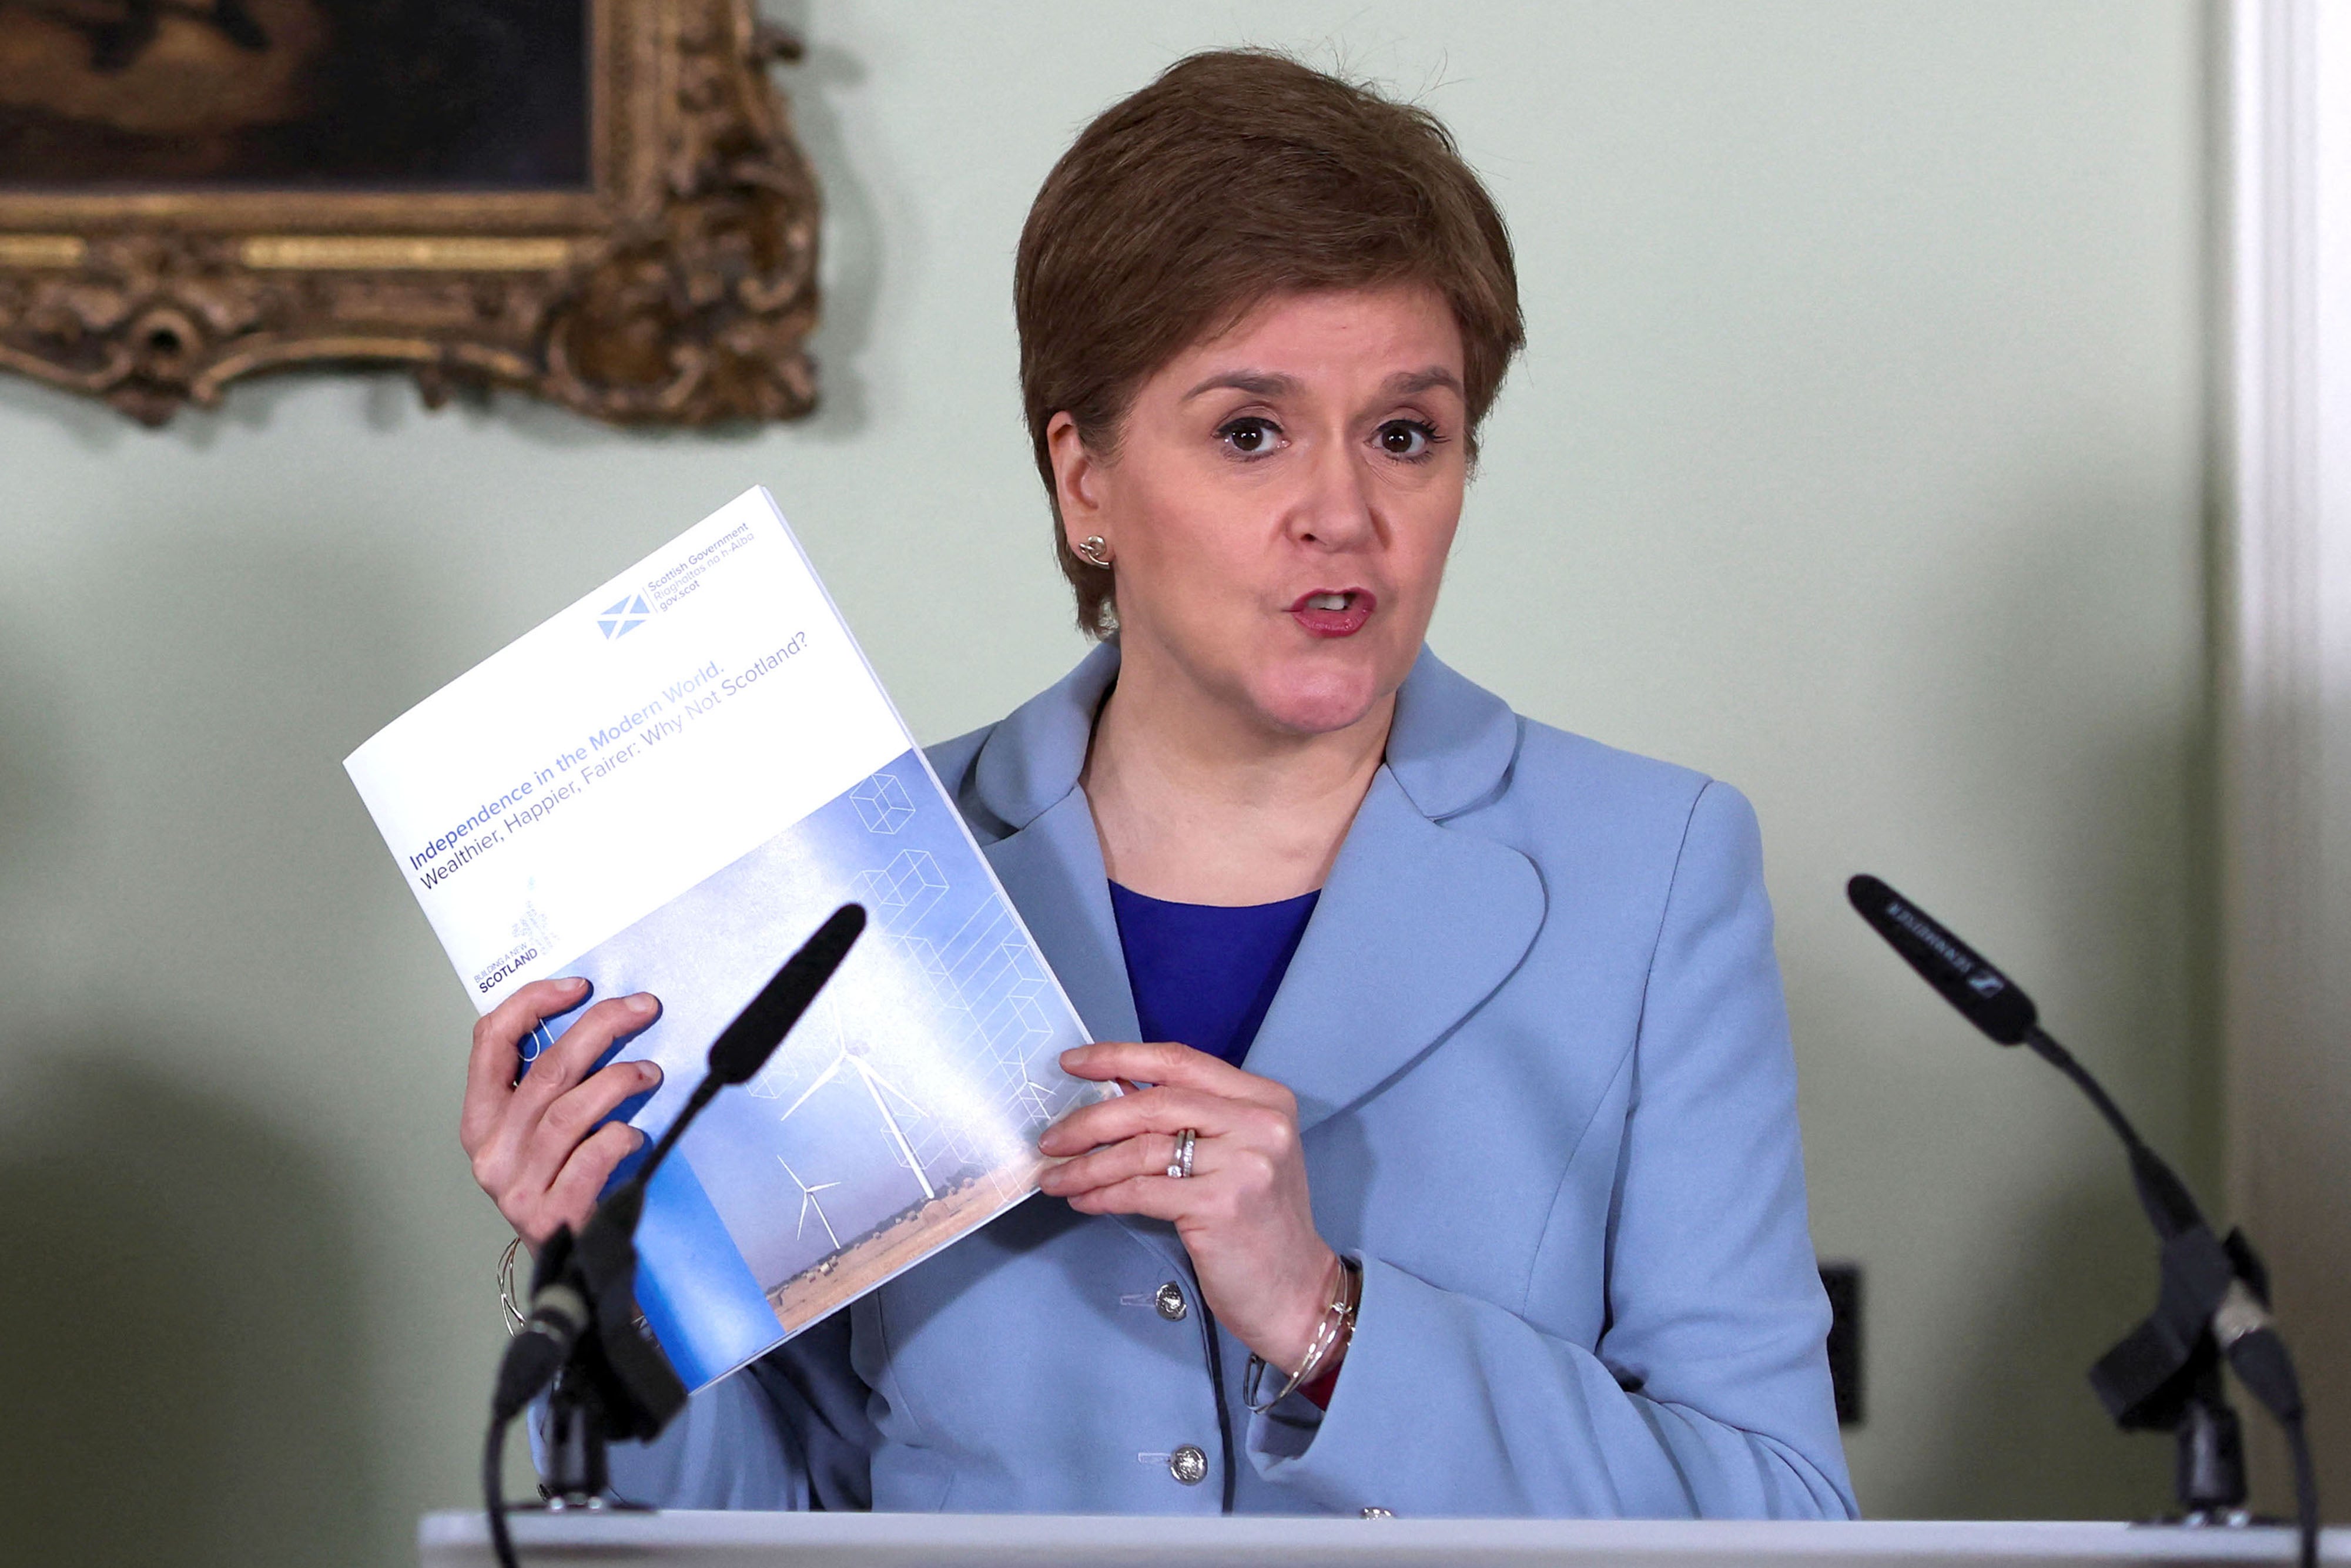 Nicola Sturgeon holds a document promoting Scottish independence at the campaign launch